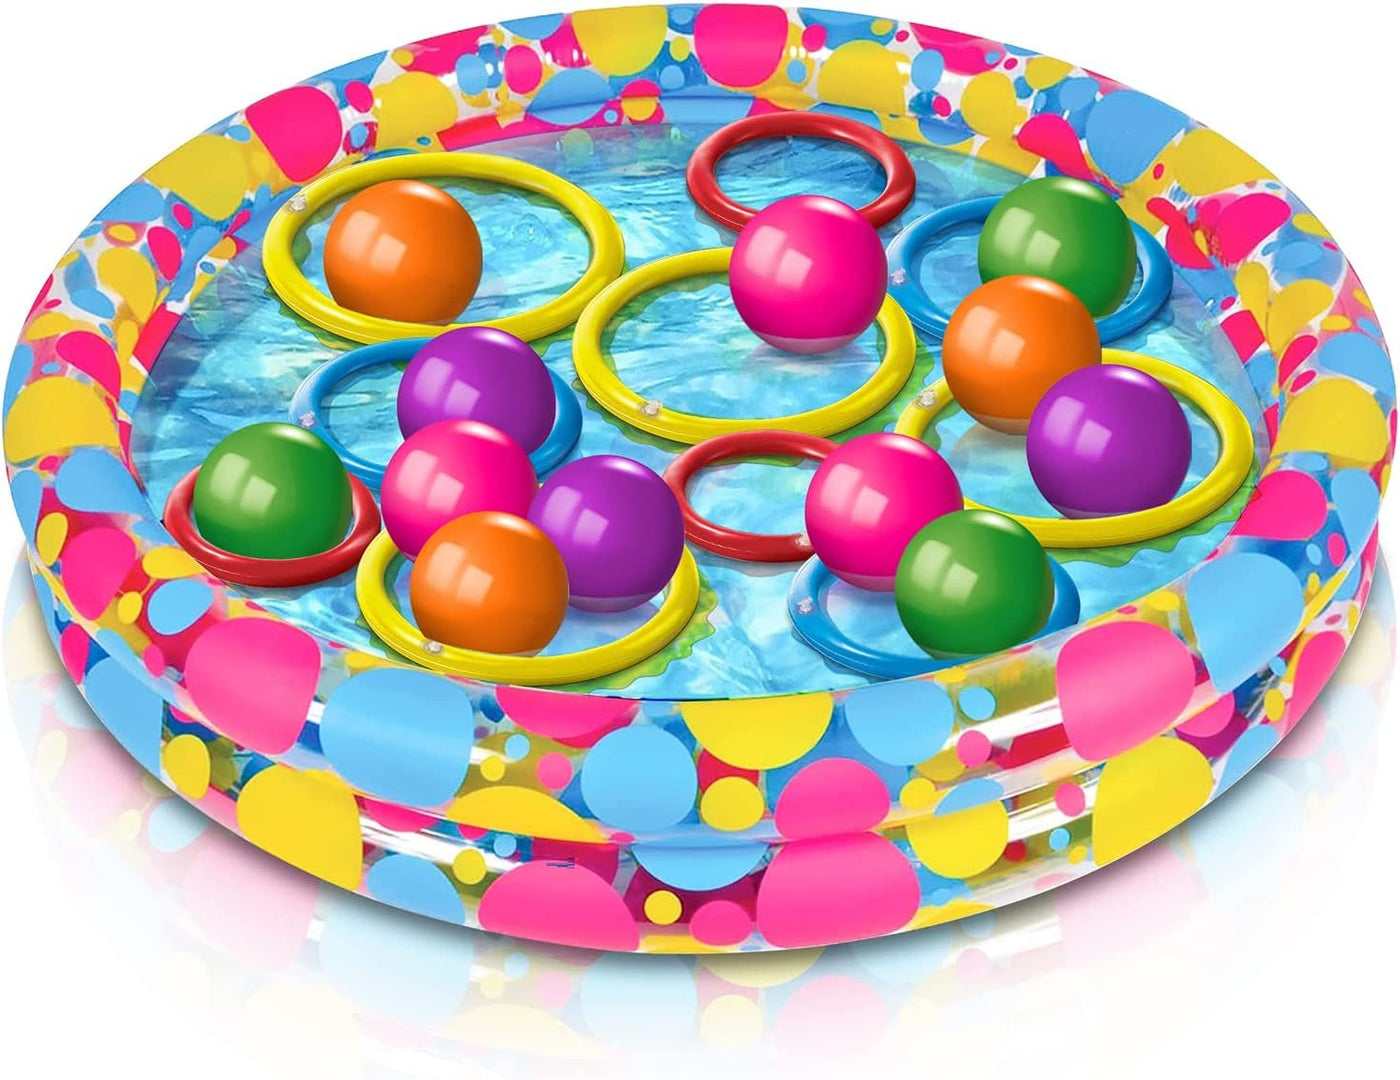 Gamie Floating Ring Toss Game for Kids, Outdoor Carnival Game Set with Inflatable Pool, Floating Rings, and Colored Plastic Balls, Outdoor Games for Family and Backyard Parties